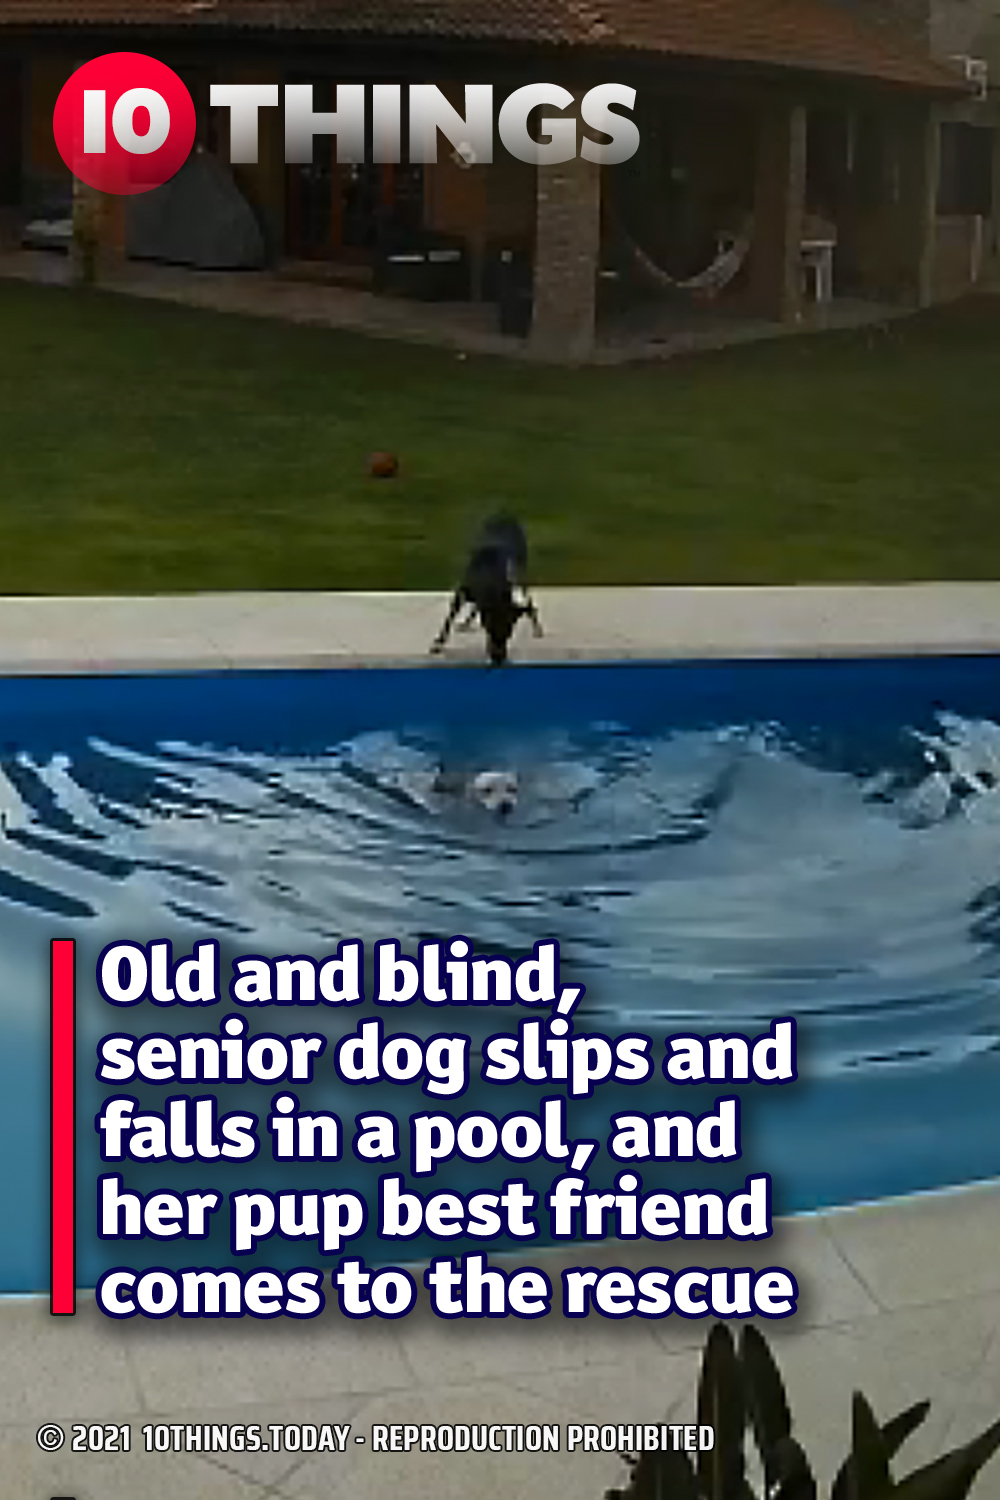 Old and blind, senior dog slips and falls in a pool, and her pup best friend comes to the rescue